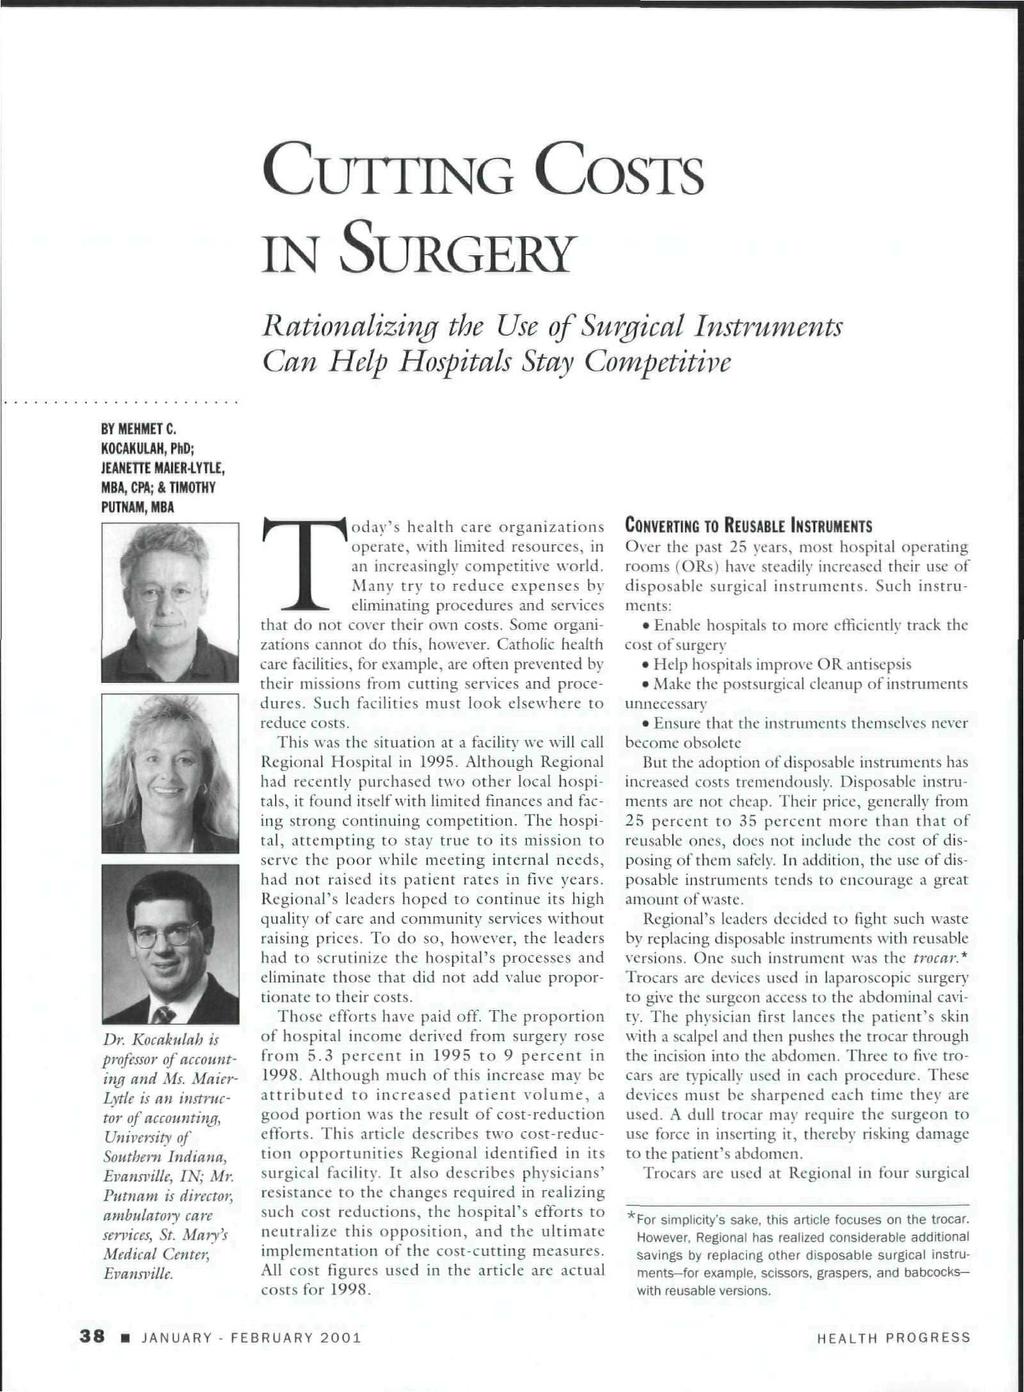 CUTTING COSTS IN SURGERY Rationalizing the Use of Surgical Instruments Can Help Hospitals Stay Competitive BY MEHMET C. KOCAKULAH. PhD; JEANETTE MAIERLYTLE, MBA, CPA; & TIMOTHY PUTNAM, MBA Dr.